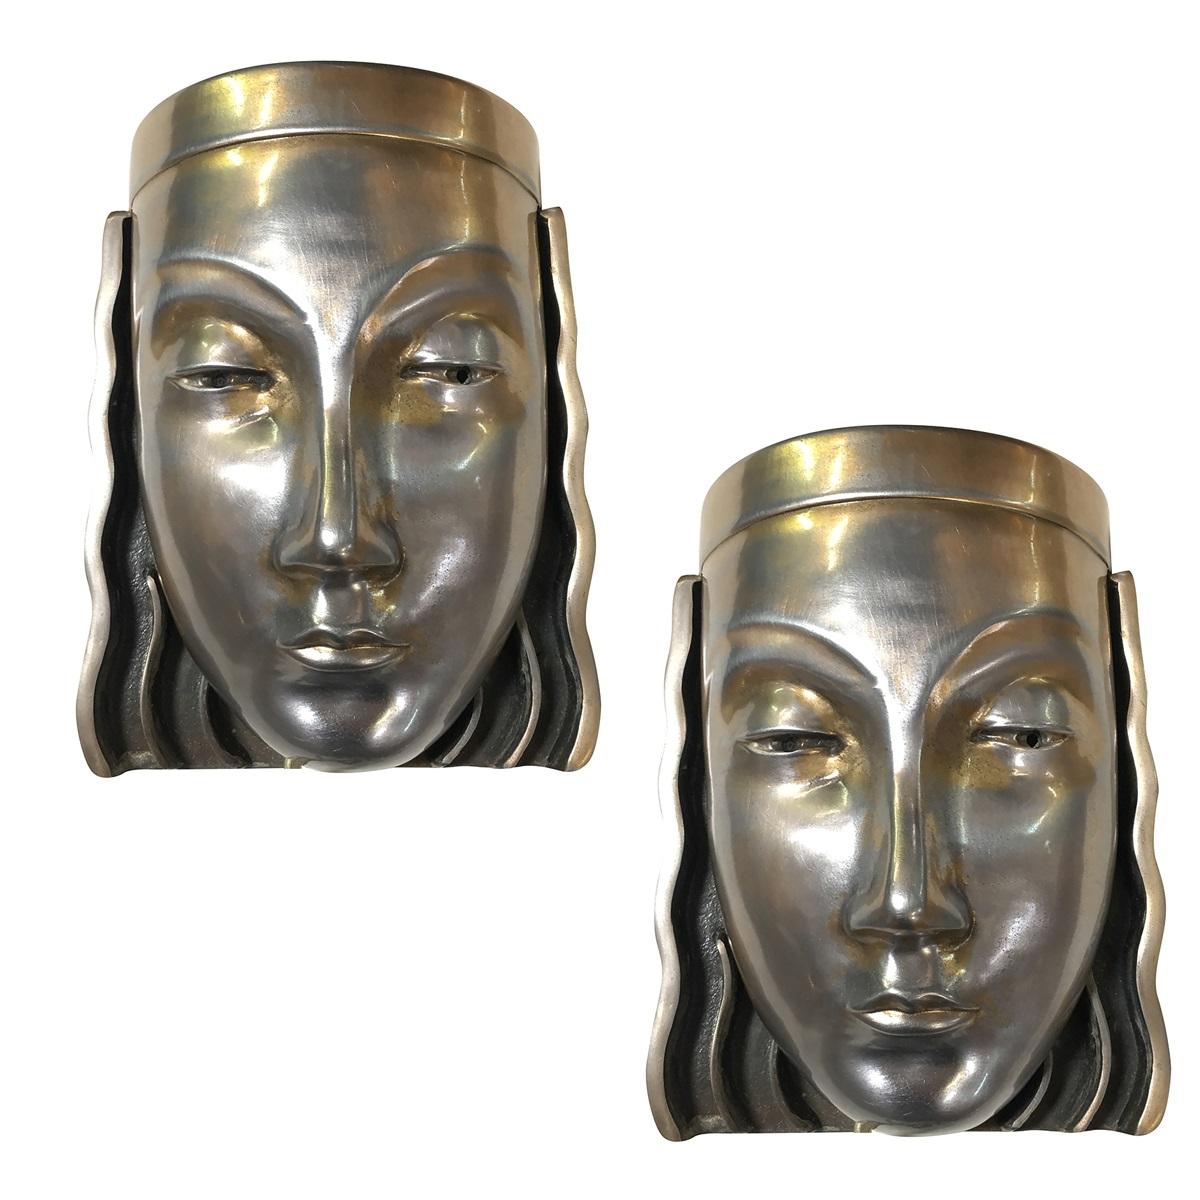 A pair of Art Deco styled female face mask wall sconces with a signature on the back marked 